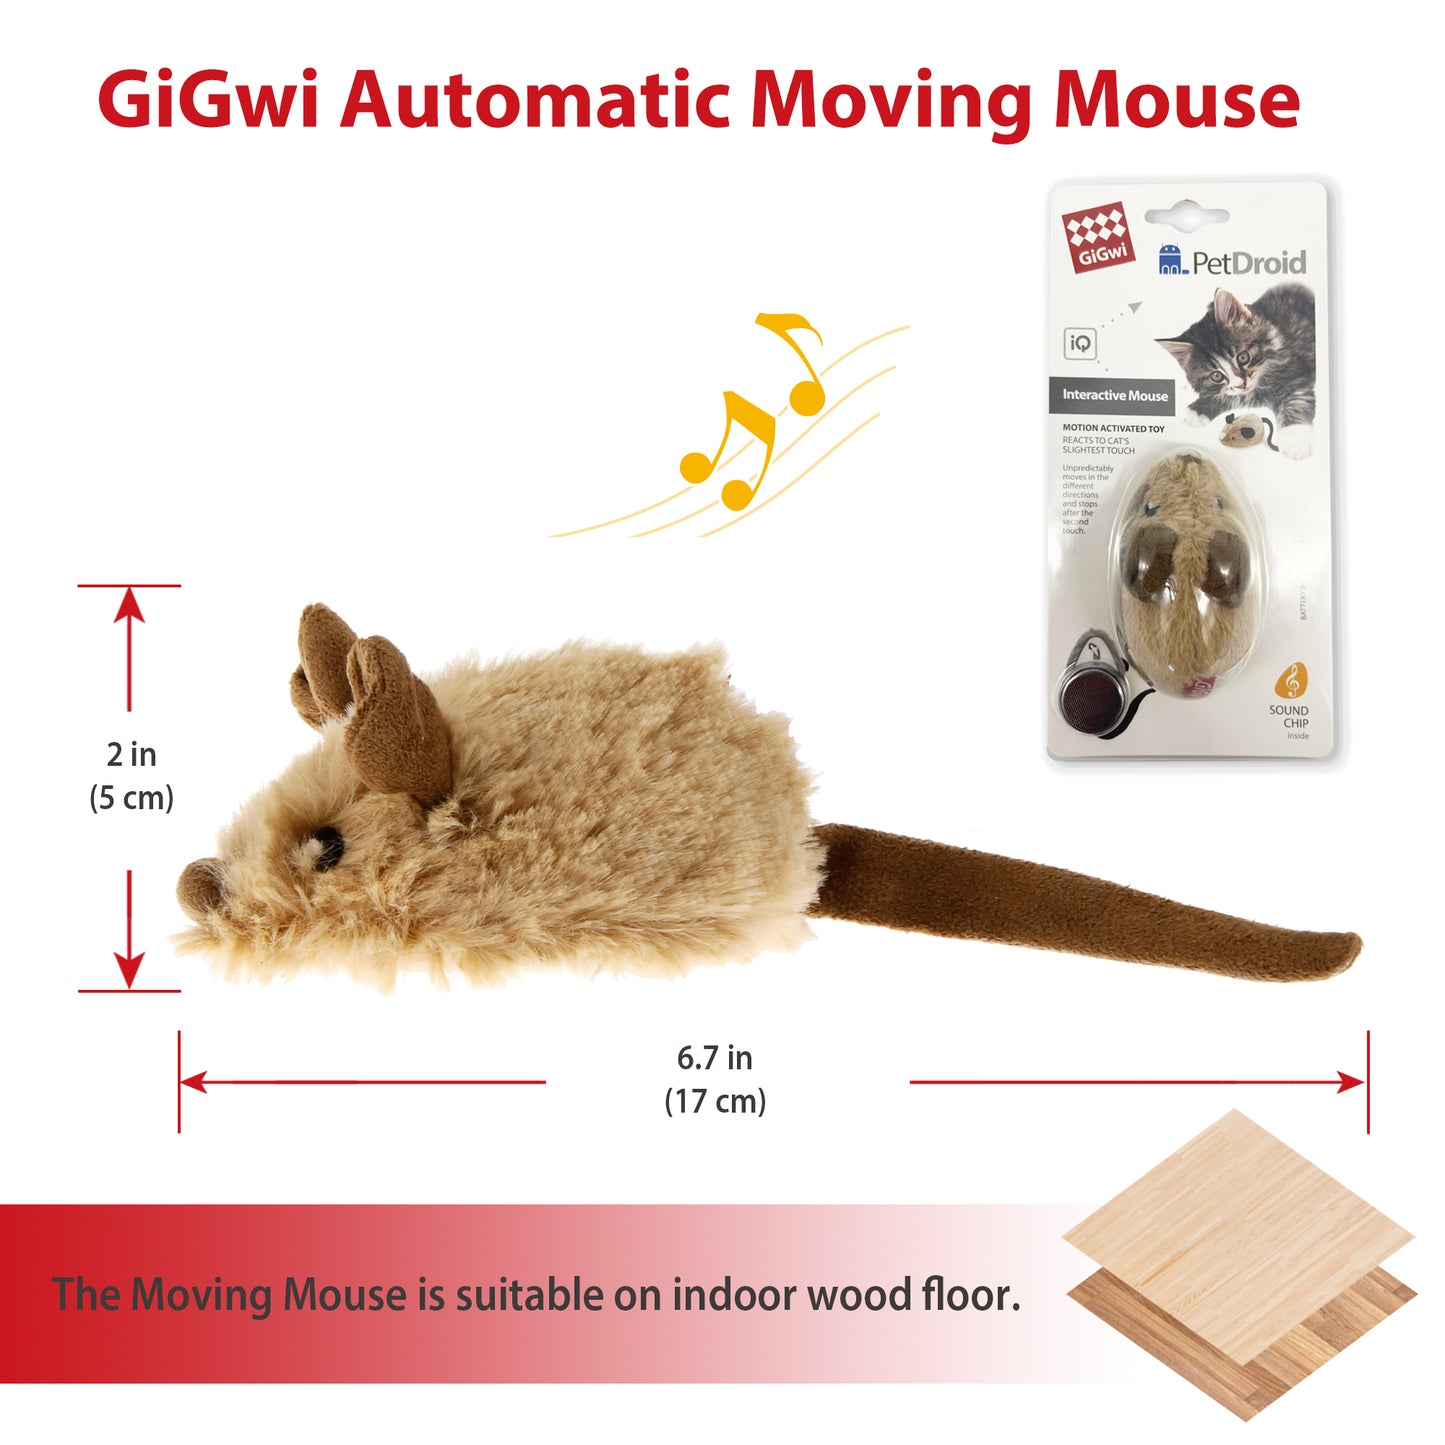 GiGwi Smart Moving Squeaky Mouse (Brown Ear)